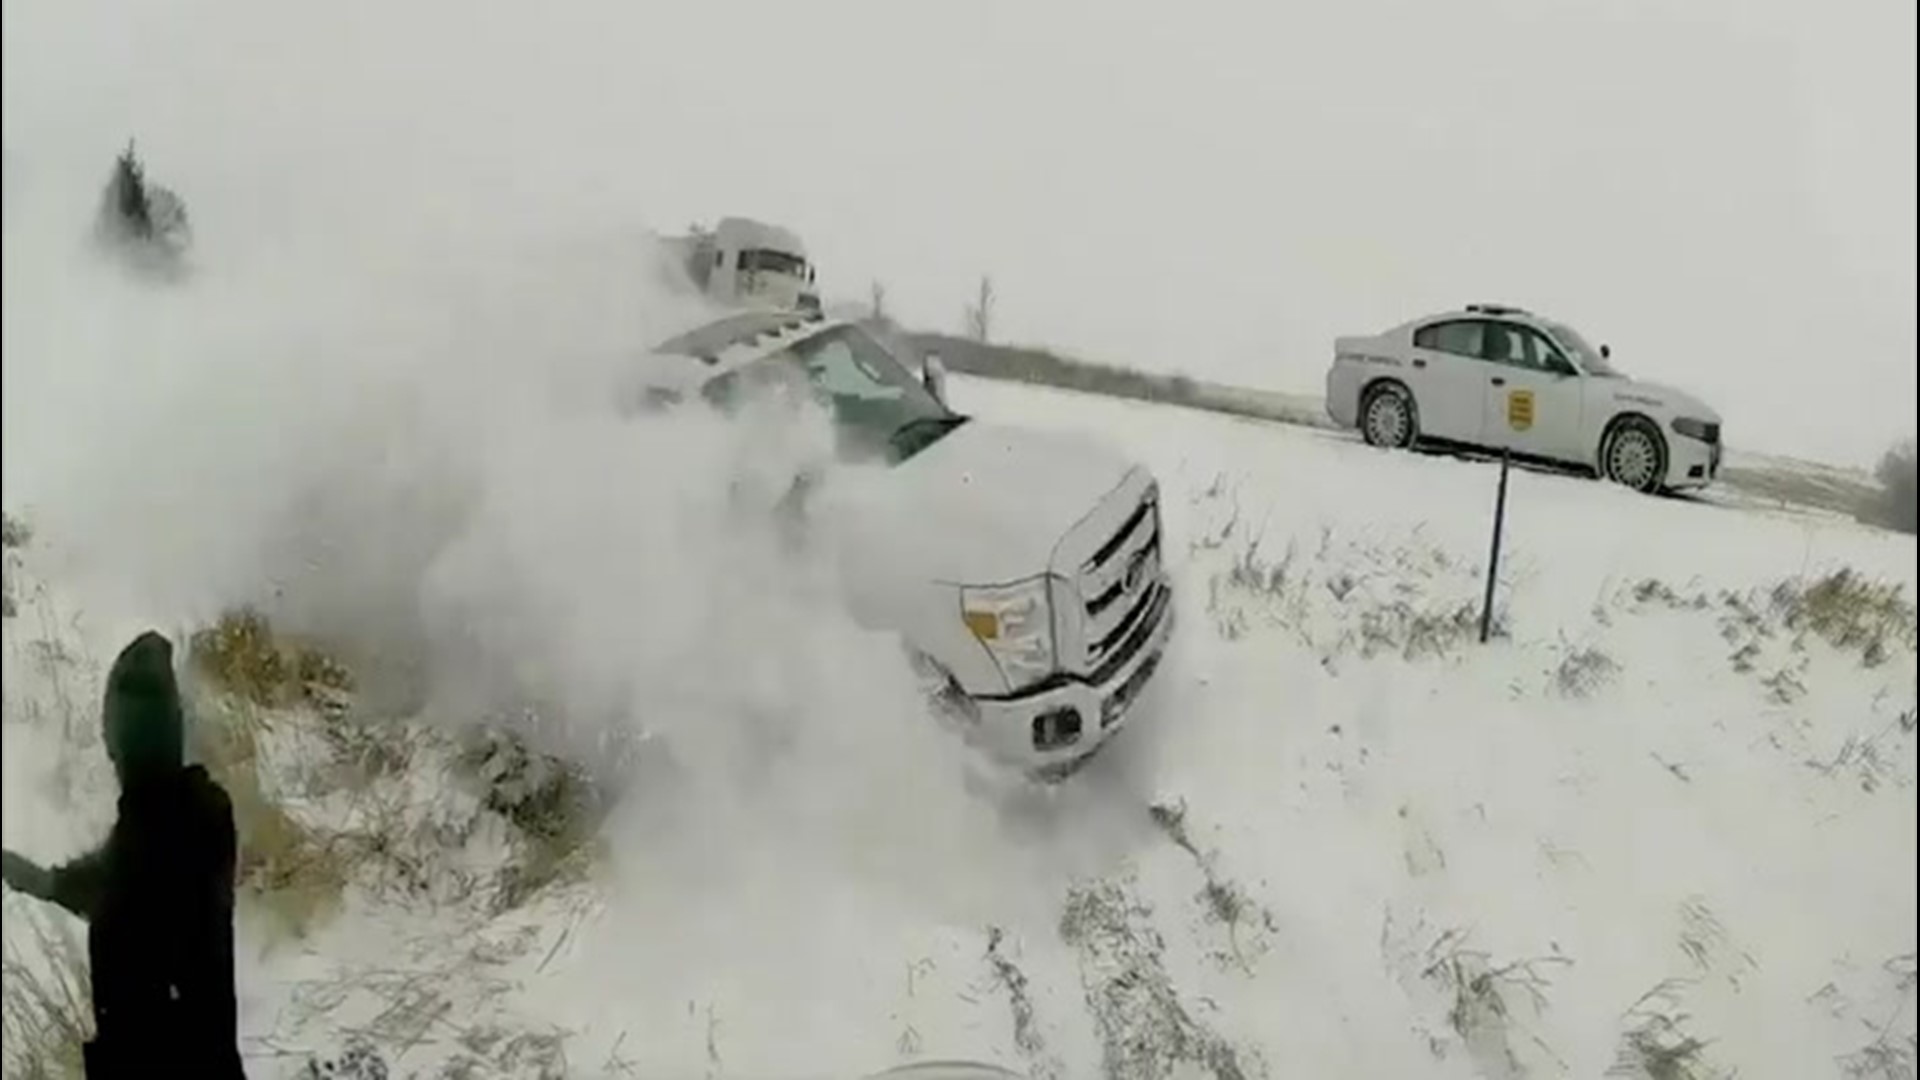 An Iowa State Trooper and a pulled over driver narrowly escaped injury when a truck lost control in snowy conditions on I-80 and slid off the road on Jan. 17.